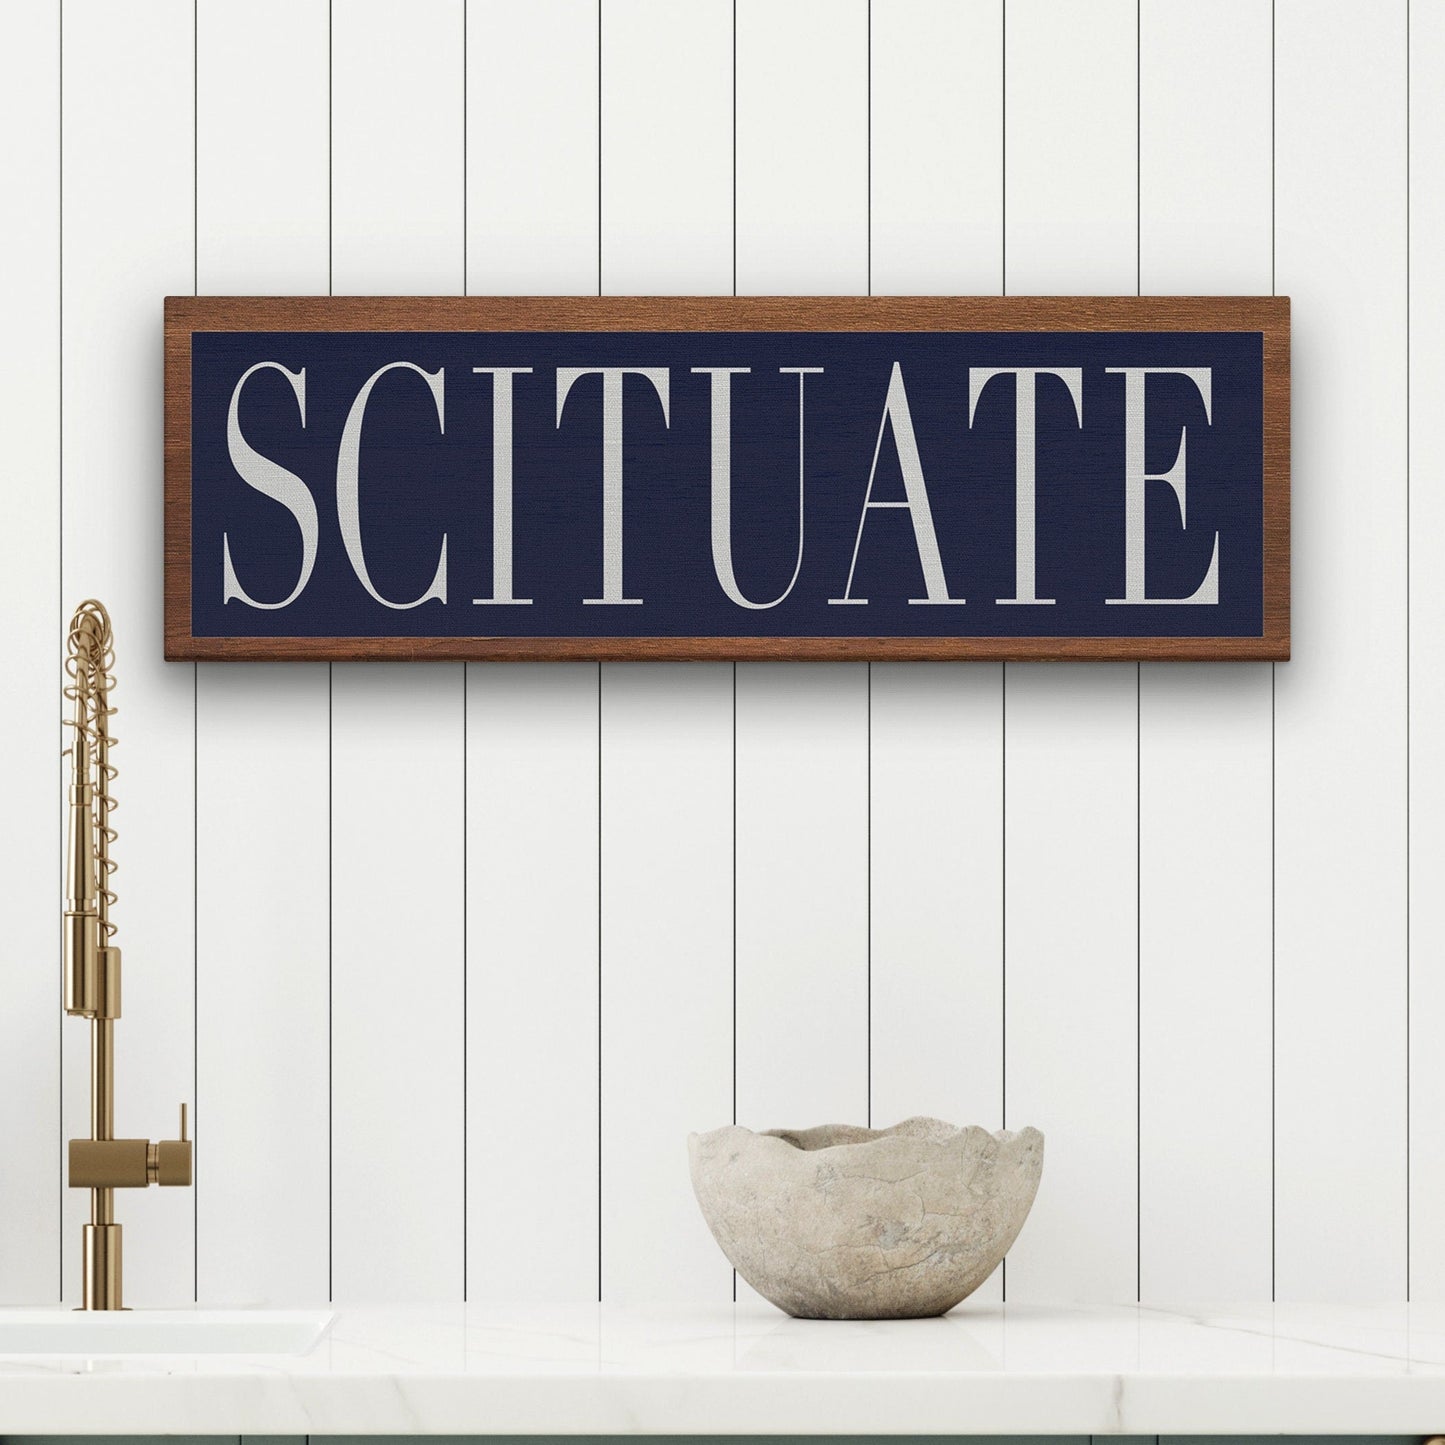 Scituate MA Wood Look Canvas Sign - Many Colors and Sizes